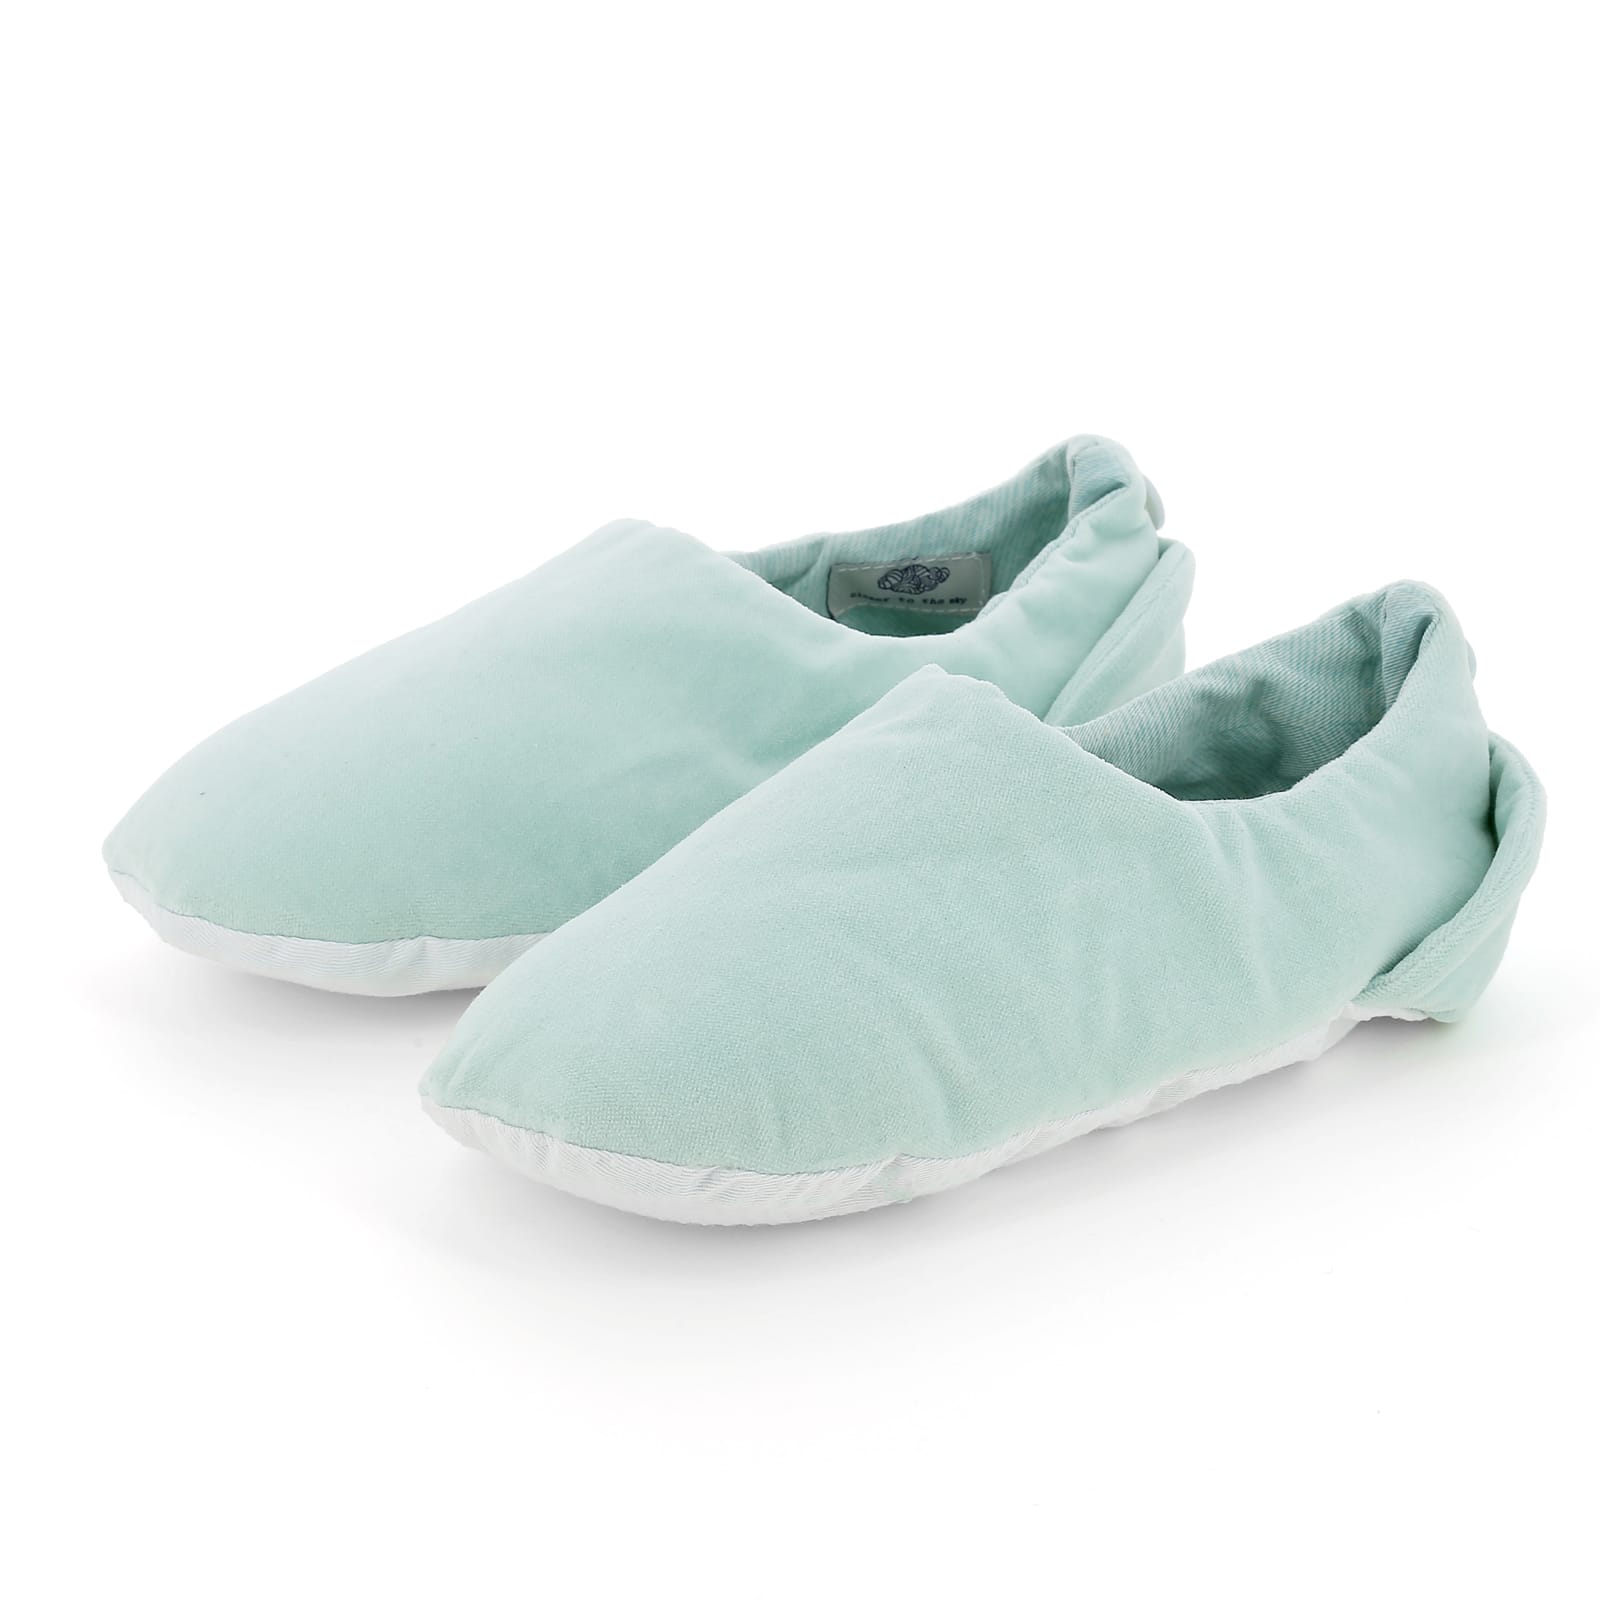 Chaussons de relaxation chauffants micro-ondes